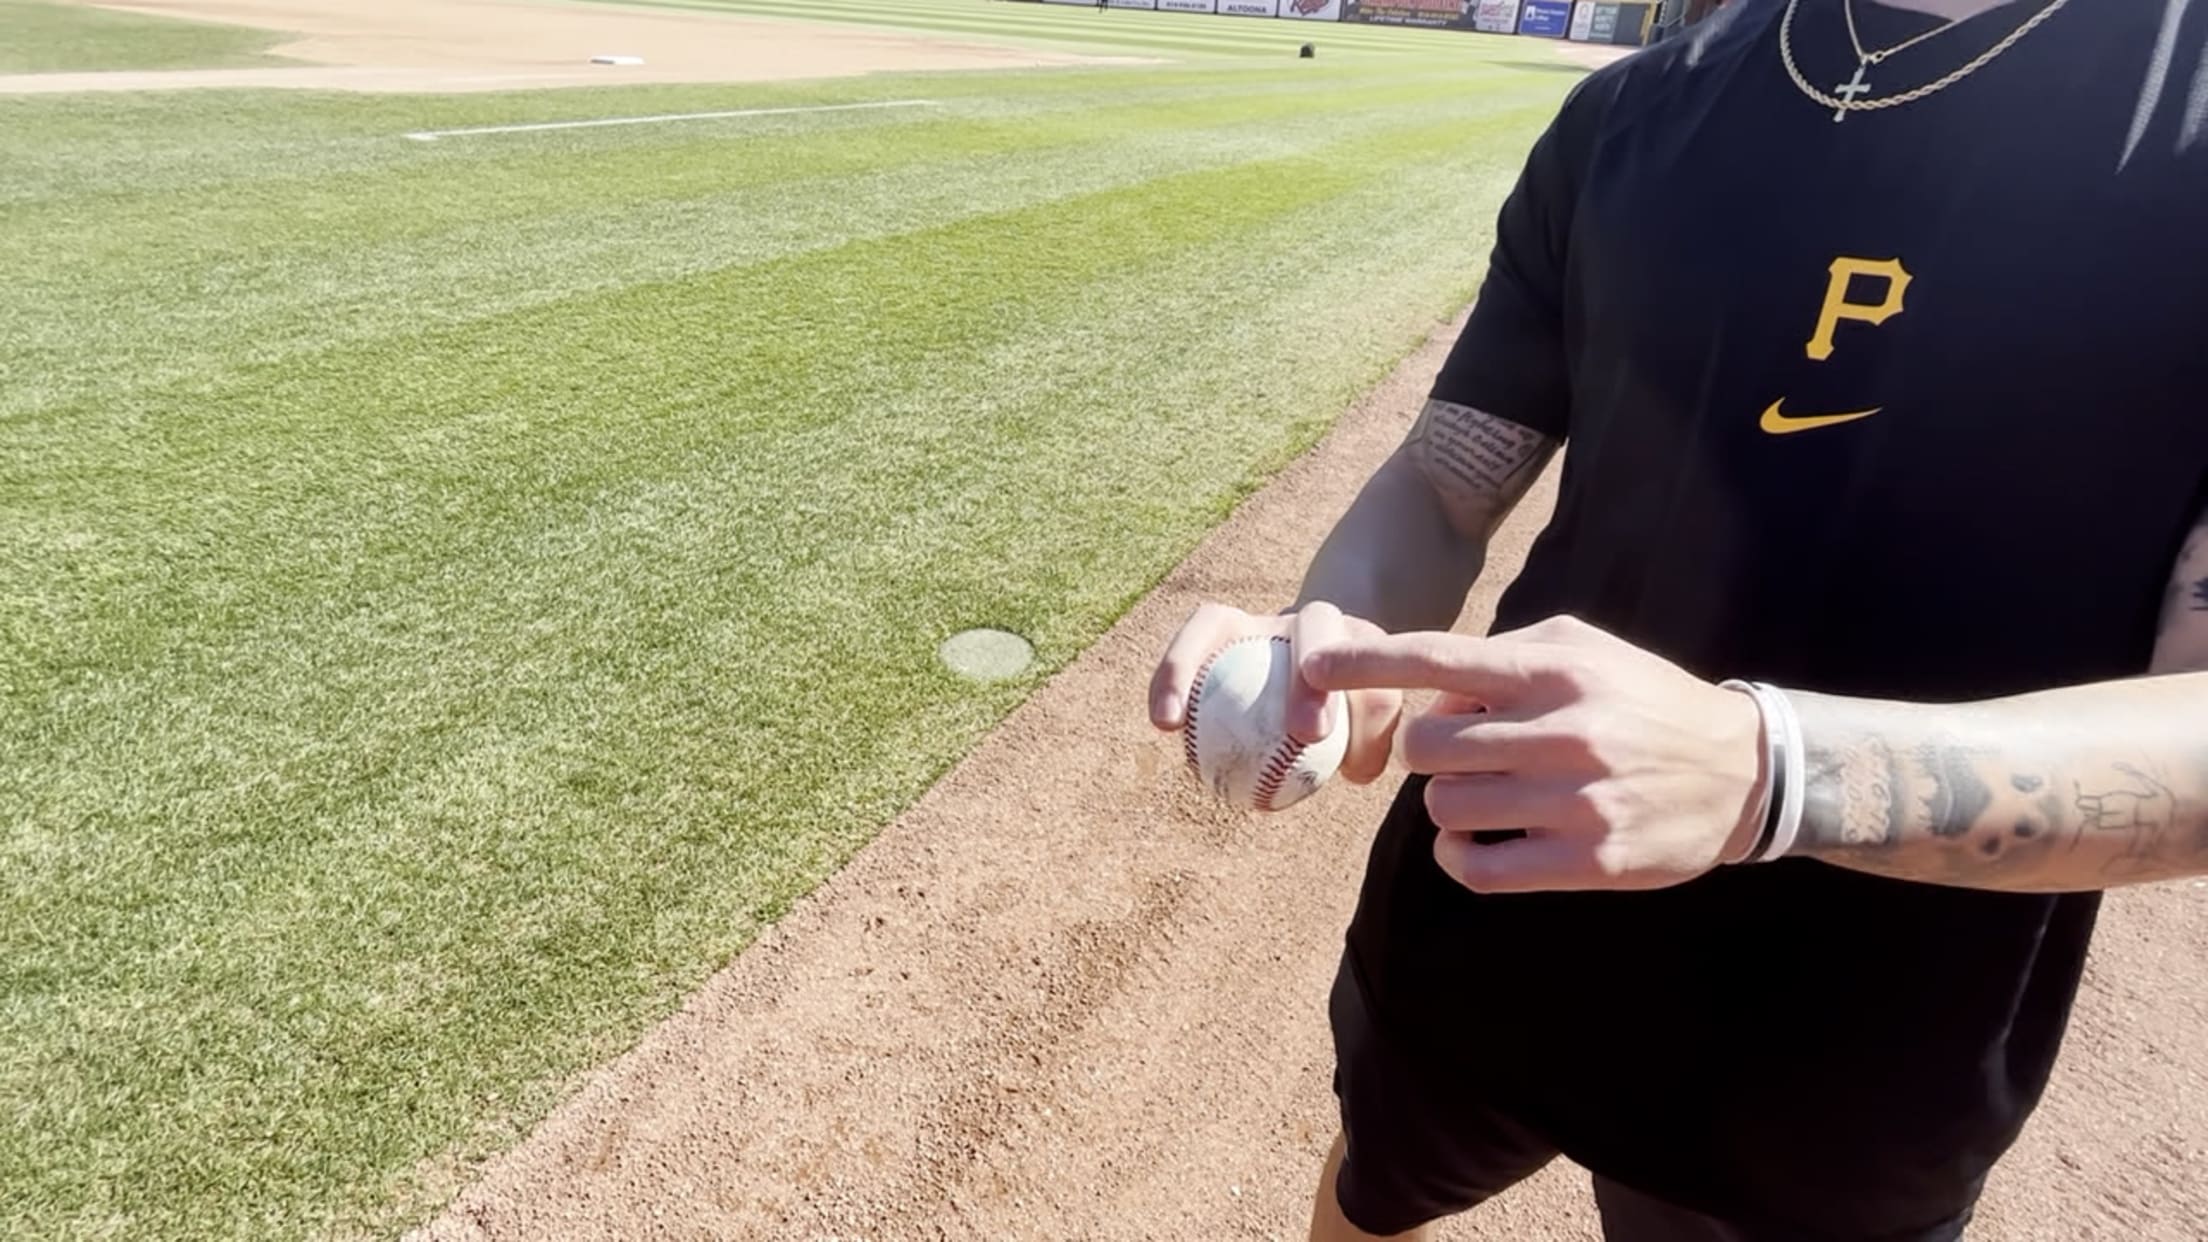 Mike Burrows on his changeup grip